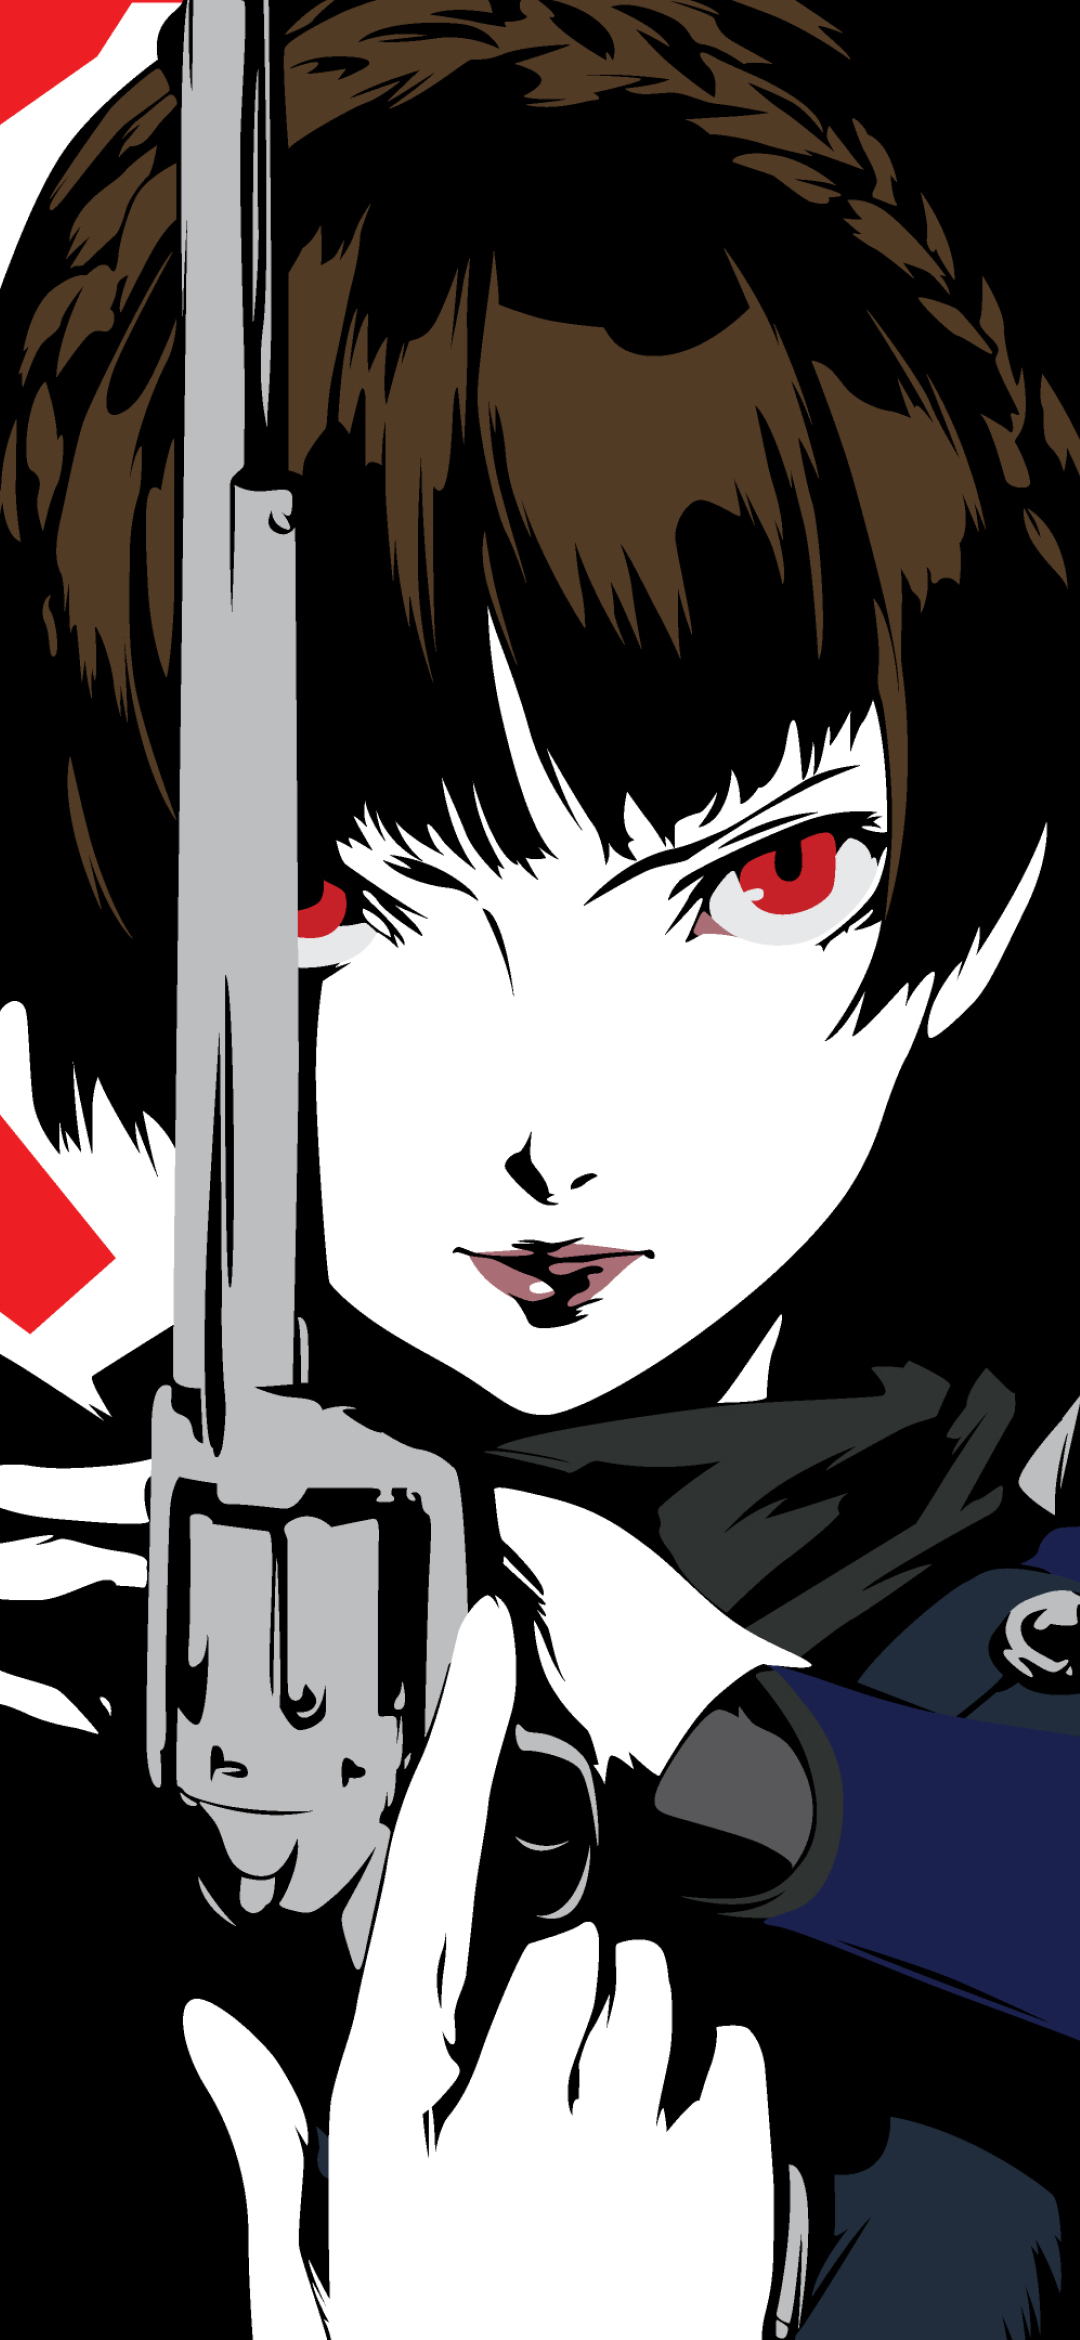 Persona 5 wallpapers  backgrounds for your desktop or mobile  Pocket  Tactics